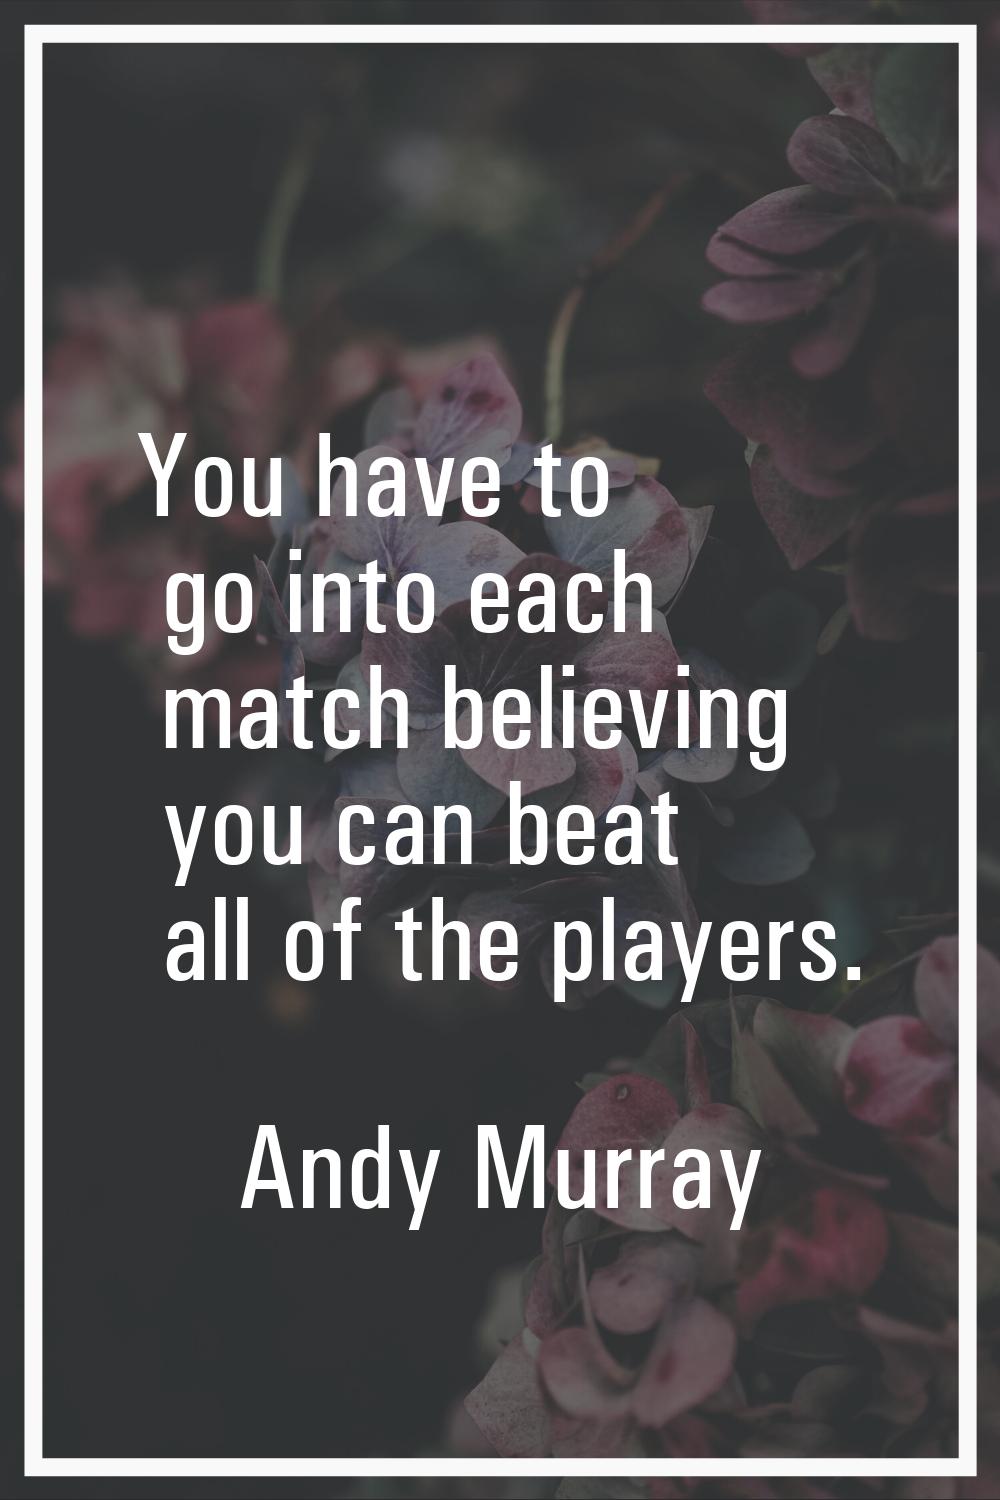 You have to go into each match believing you can beat all of the players.